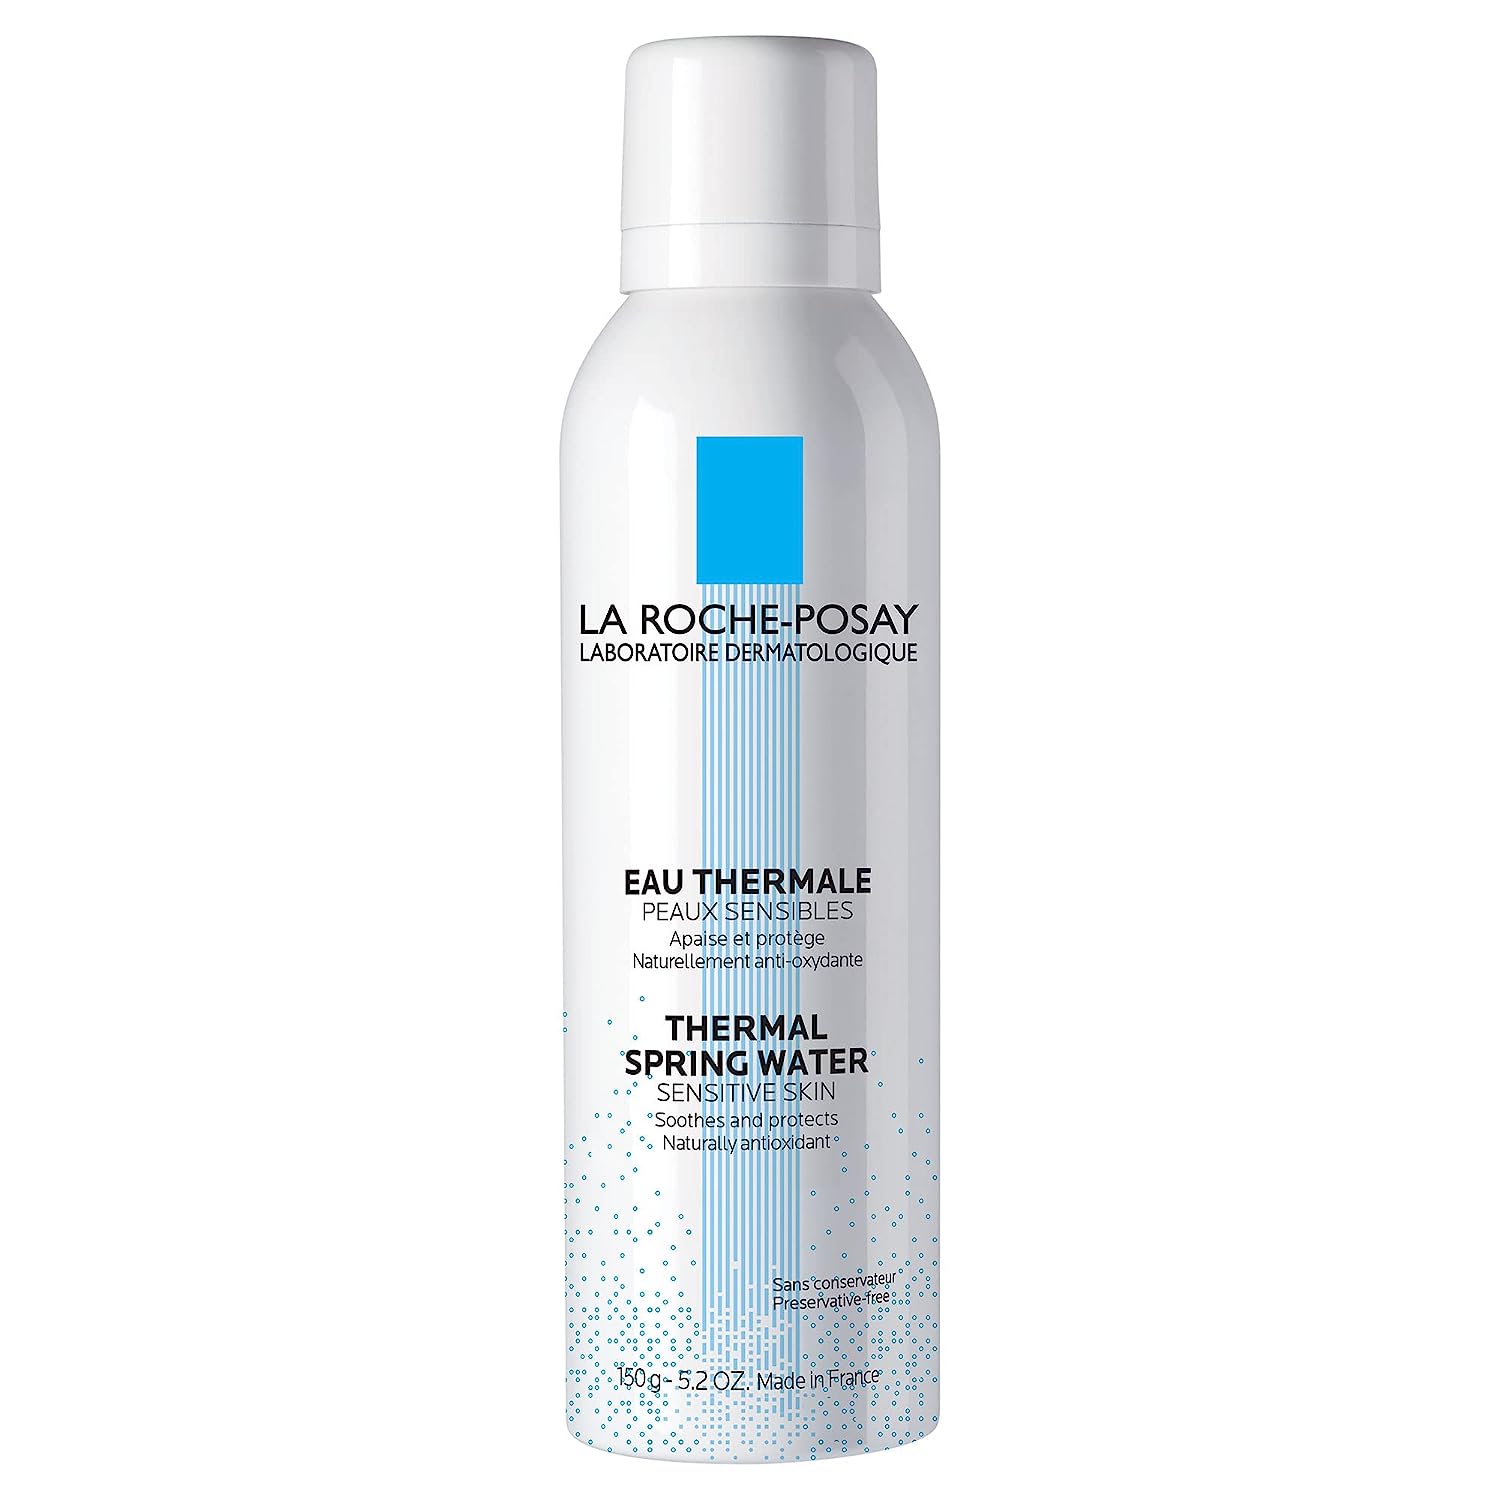 La Roche-Posay Thermal Spring Water, Face Mist [...]